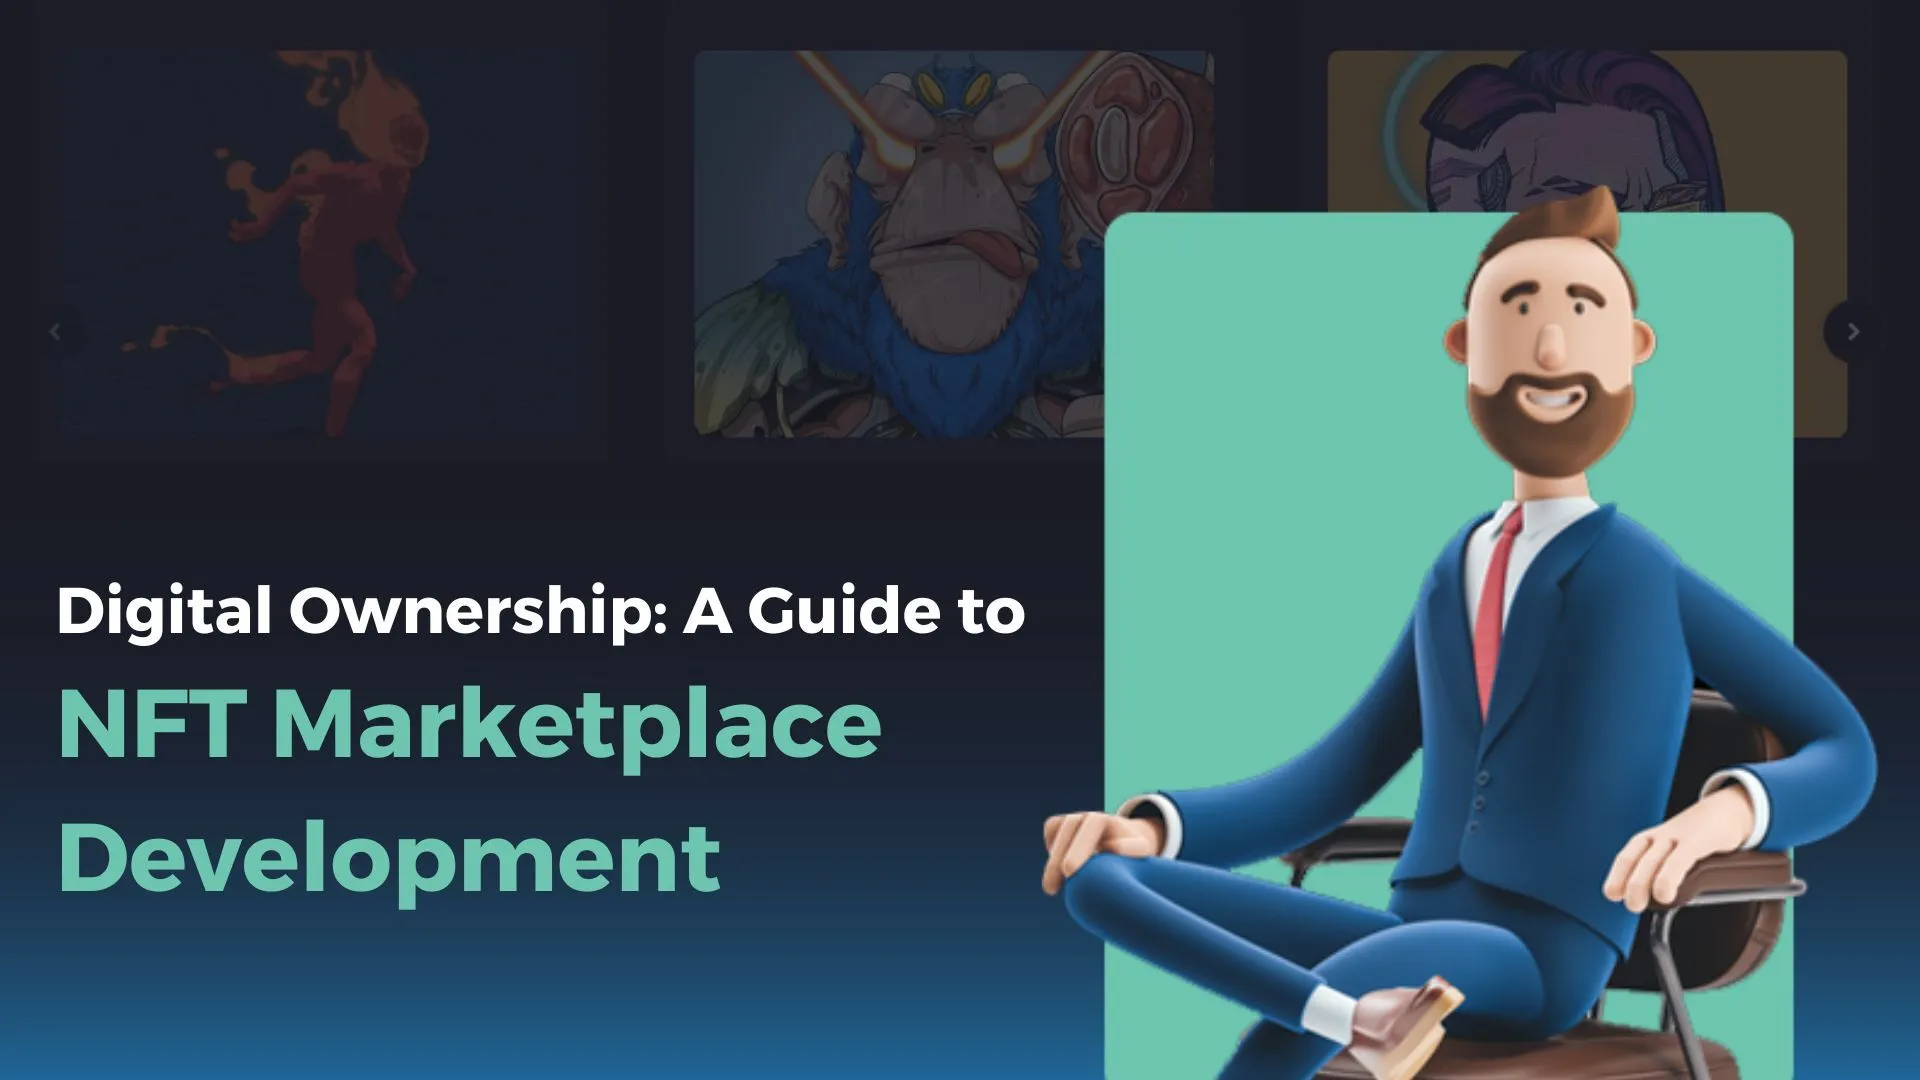 Building the Future of Digital Ownership: A Guide to NFT Marketplace Development